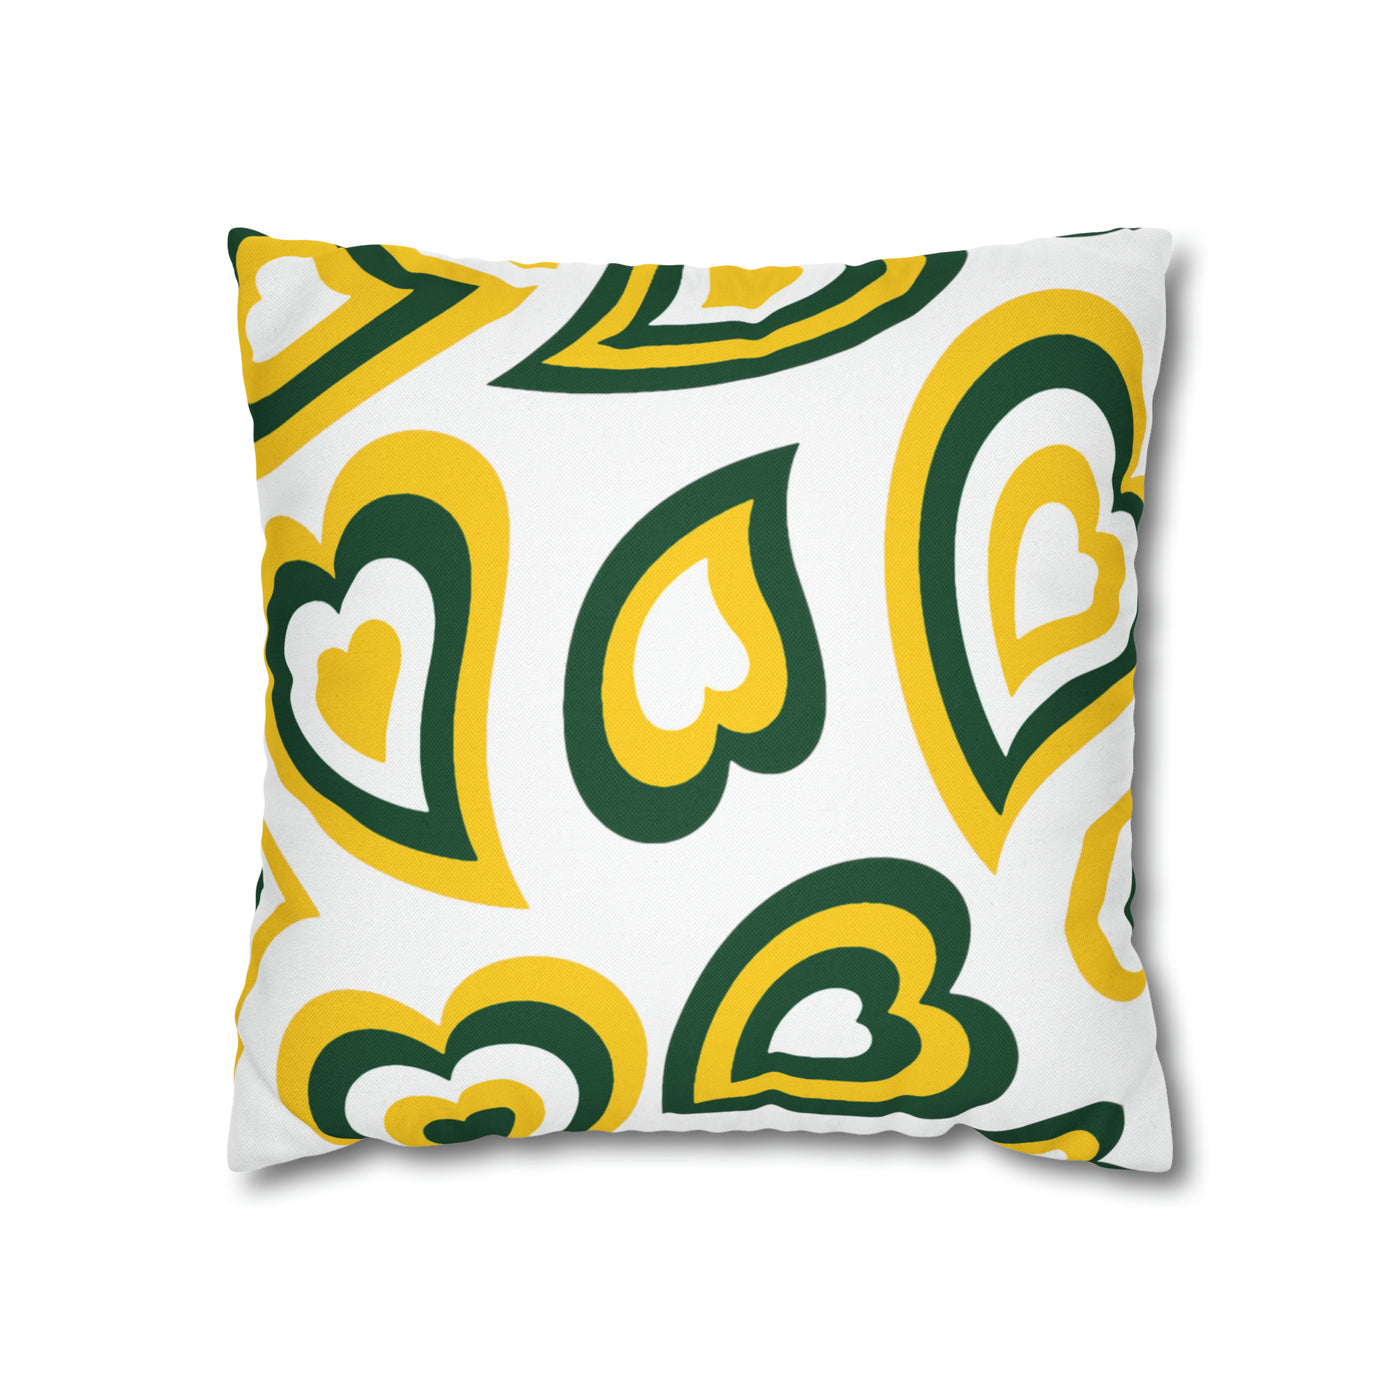 Retro Heart Pillow - Green and Gold, Heart Pillow, Hearts, Valentine's Day, USF, Oregon,Bed Party Pillow, Sleepaway Camp Pillow,Camp